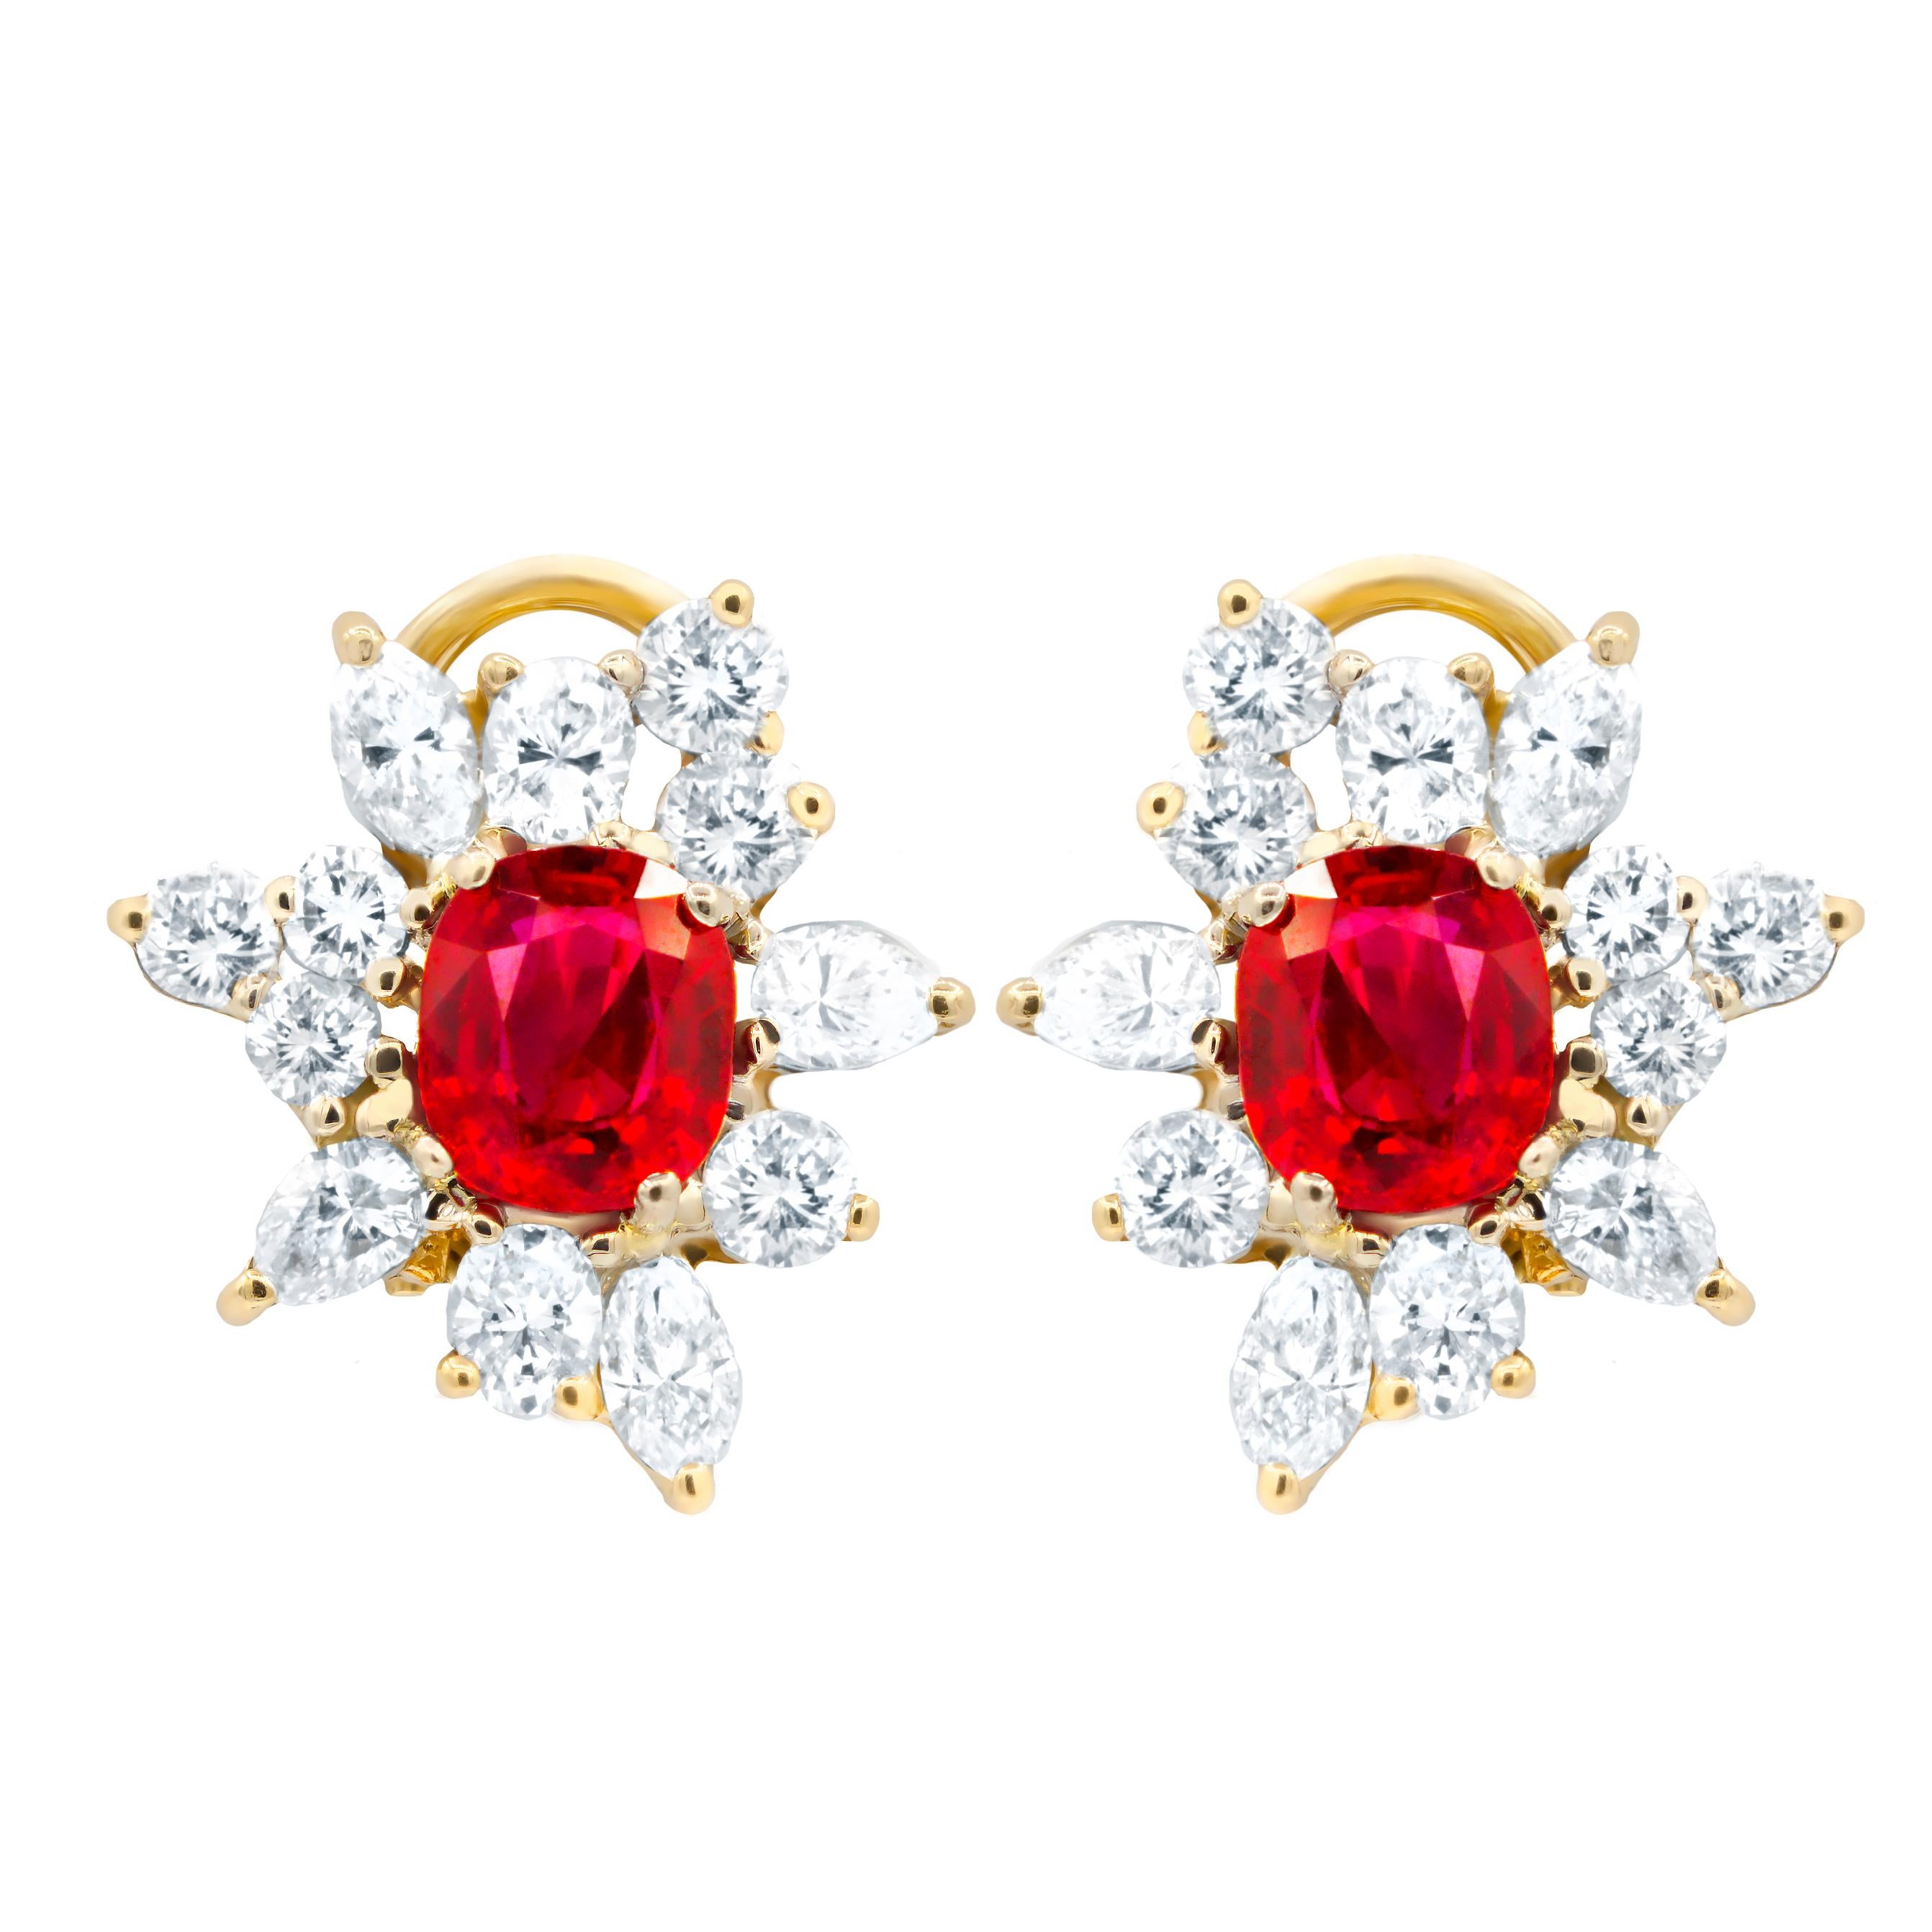 18k yellow gold snow flake earings with pigen blood red rubys round diamonds 3.00ct and ruby inside 2.65ct.
C.Dunaigre